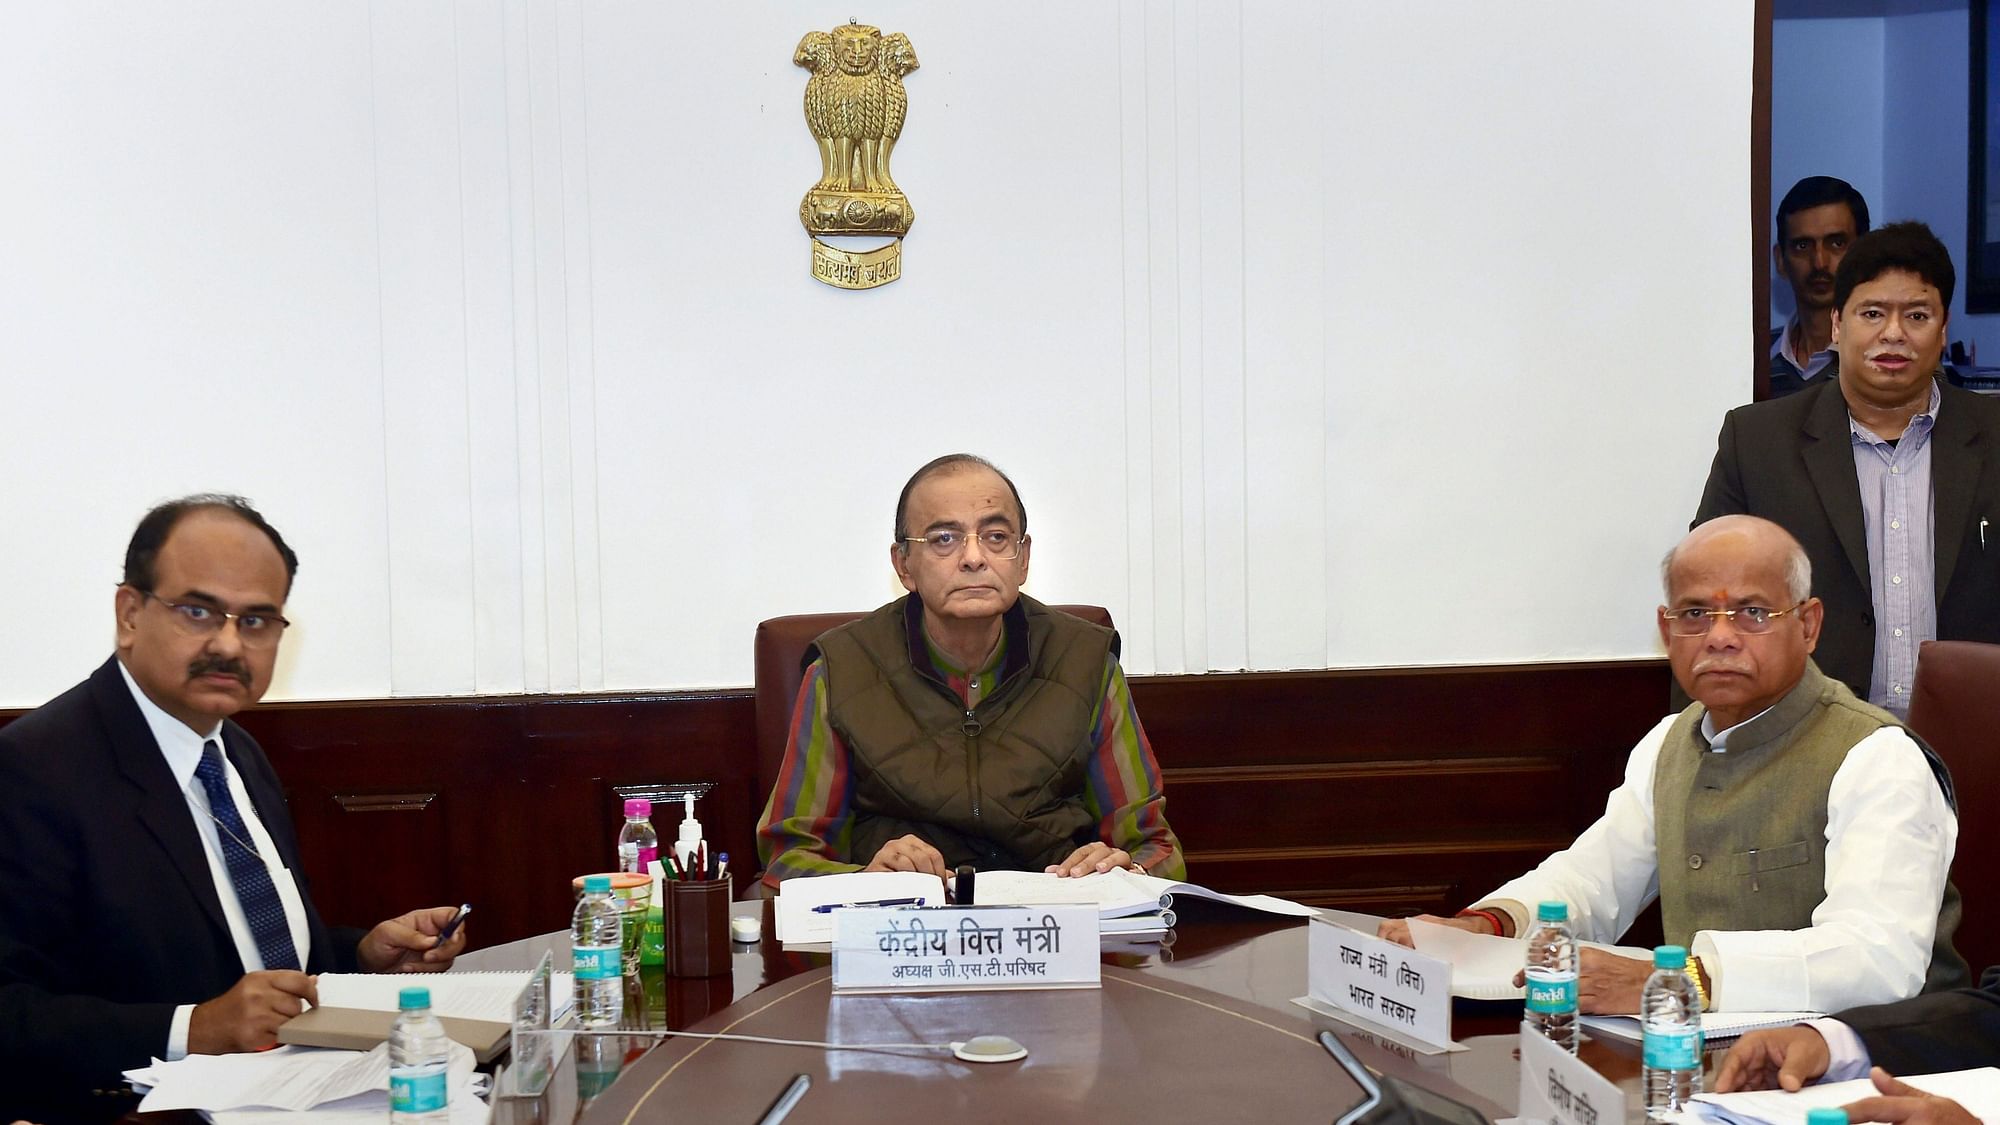 Arun Jaitley, Minister of State for Finance Shiv Pratap Shukla and Revenue Secretary Ajay Bhushan Pandey during the 33rd GST Council meeting  in New Delhi.